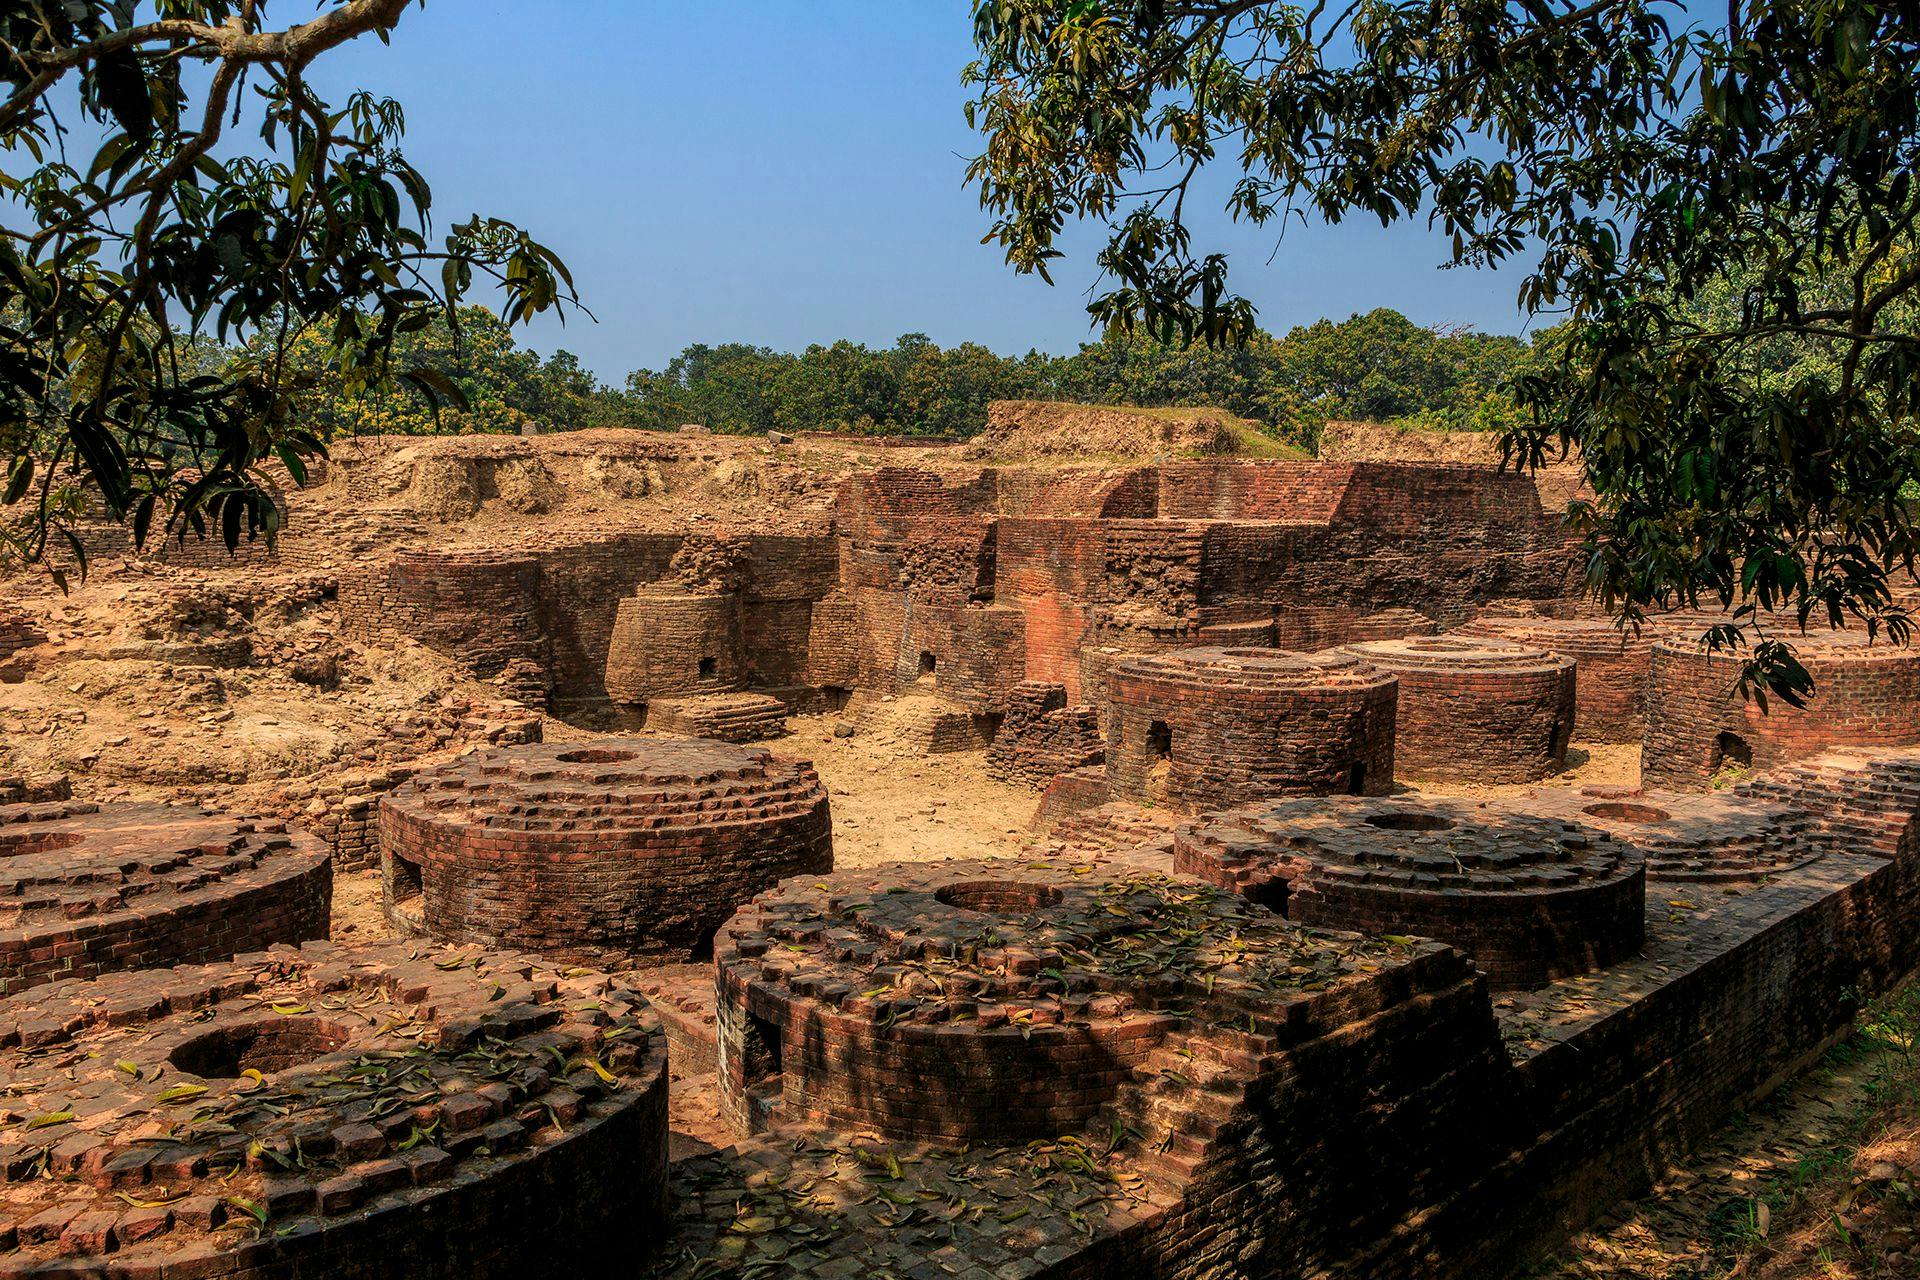 Probable Ruins of Gauda’s Palace